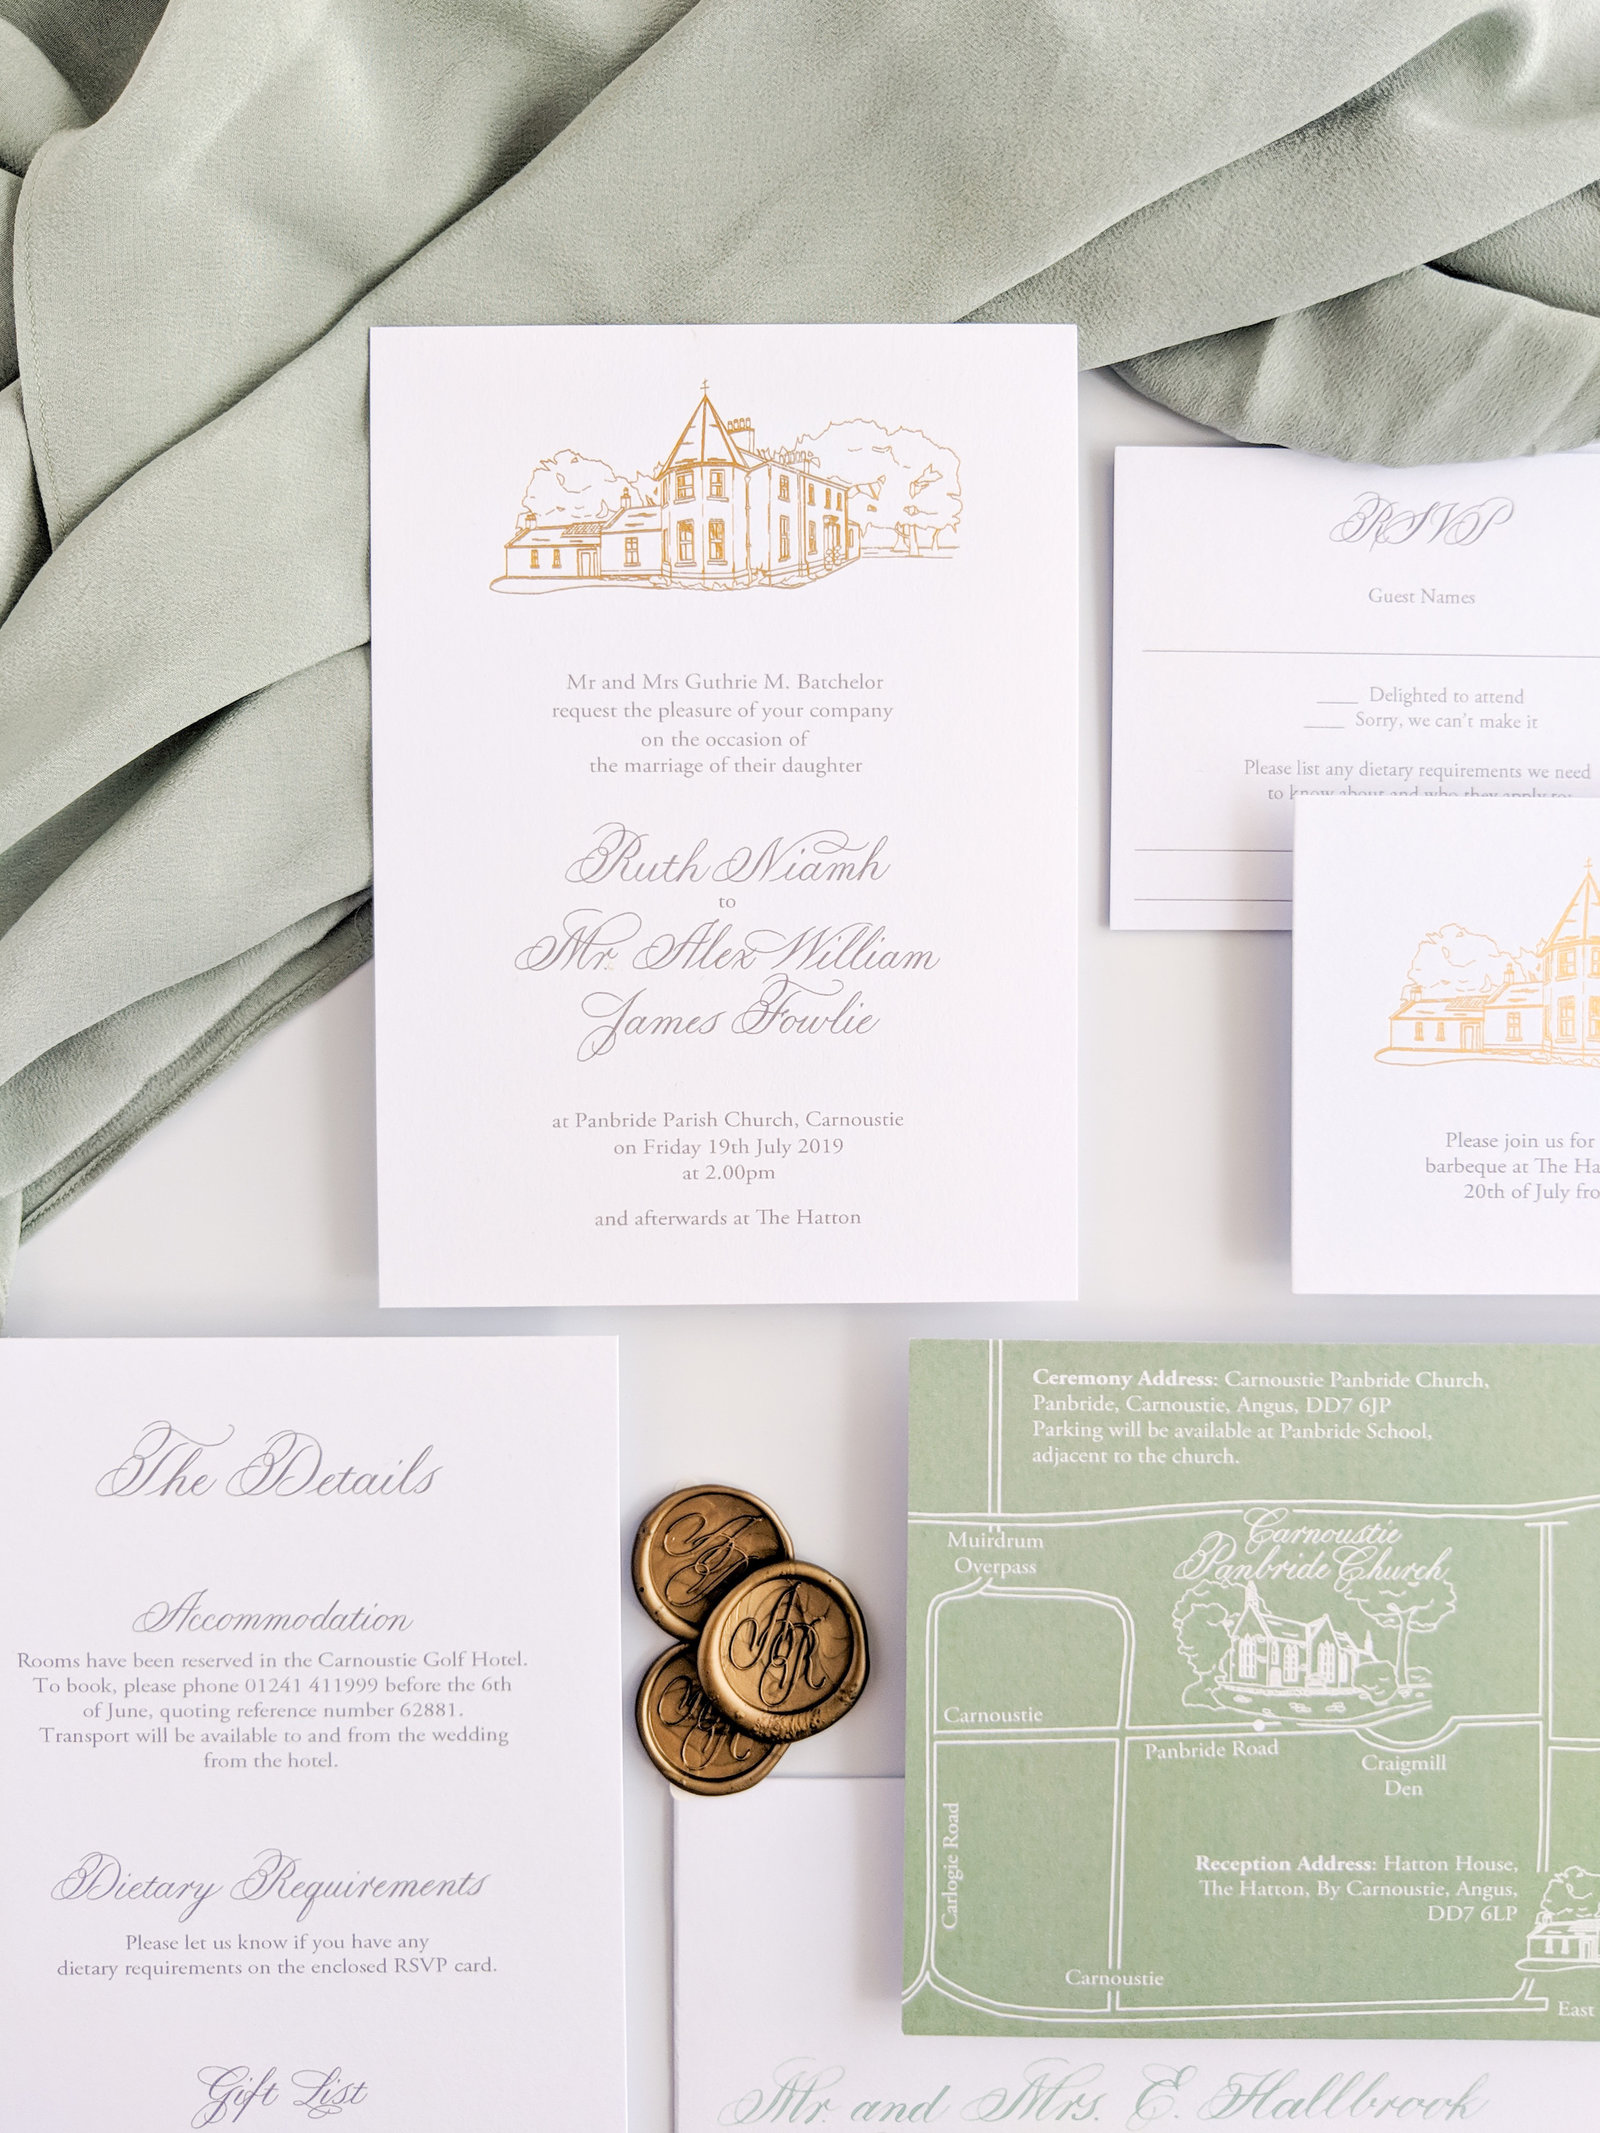 Wedding invitations with gold and green